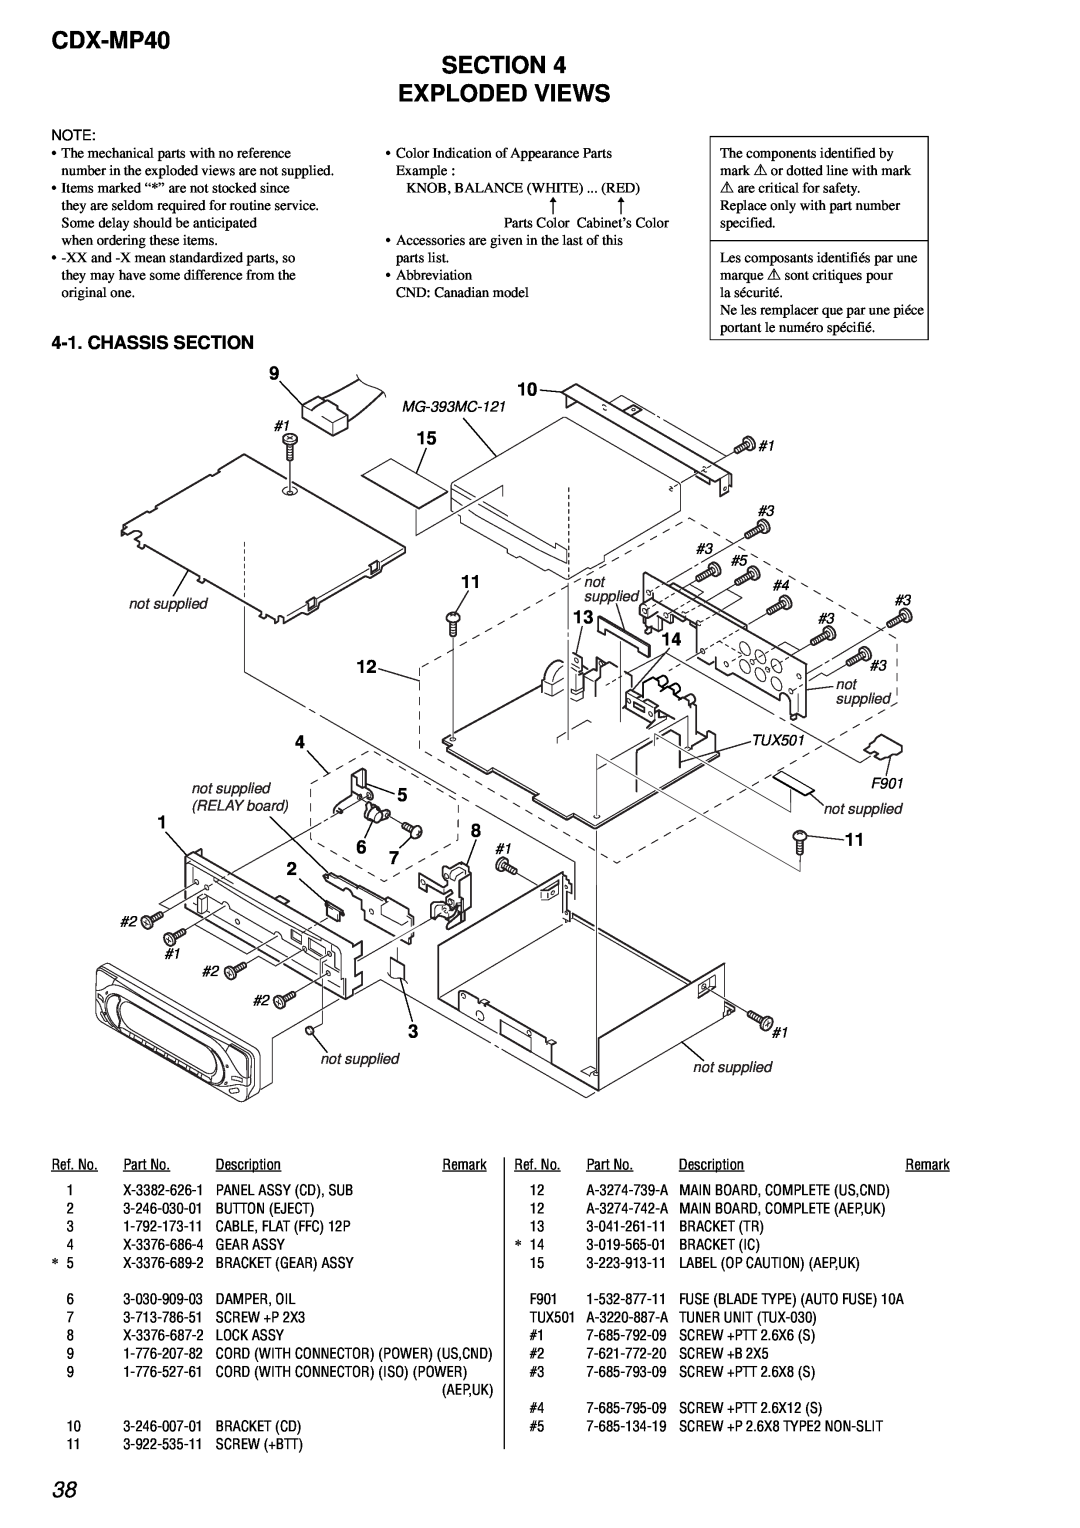 Sony service manual CDX-MP40 SECTION EXPLODED VIEWS, Chassis 